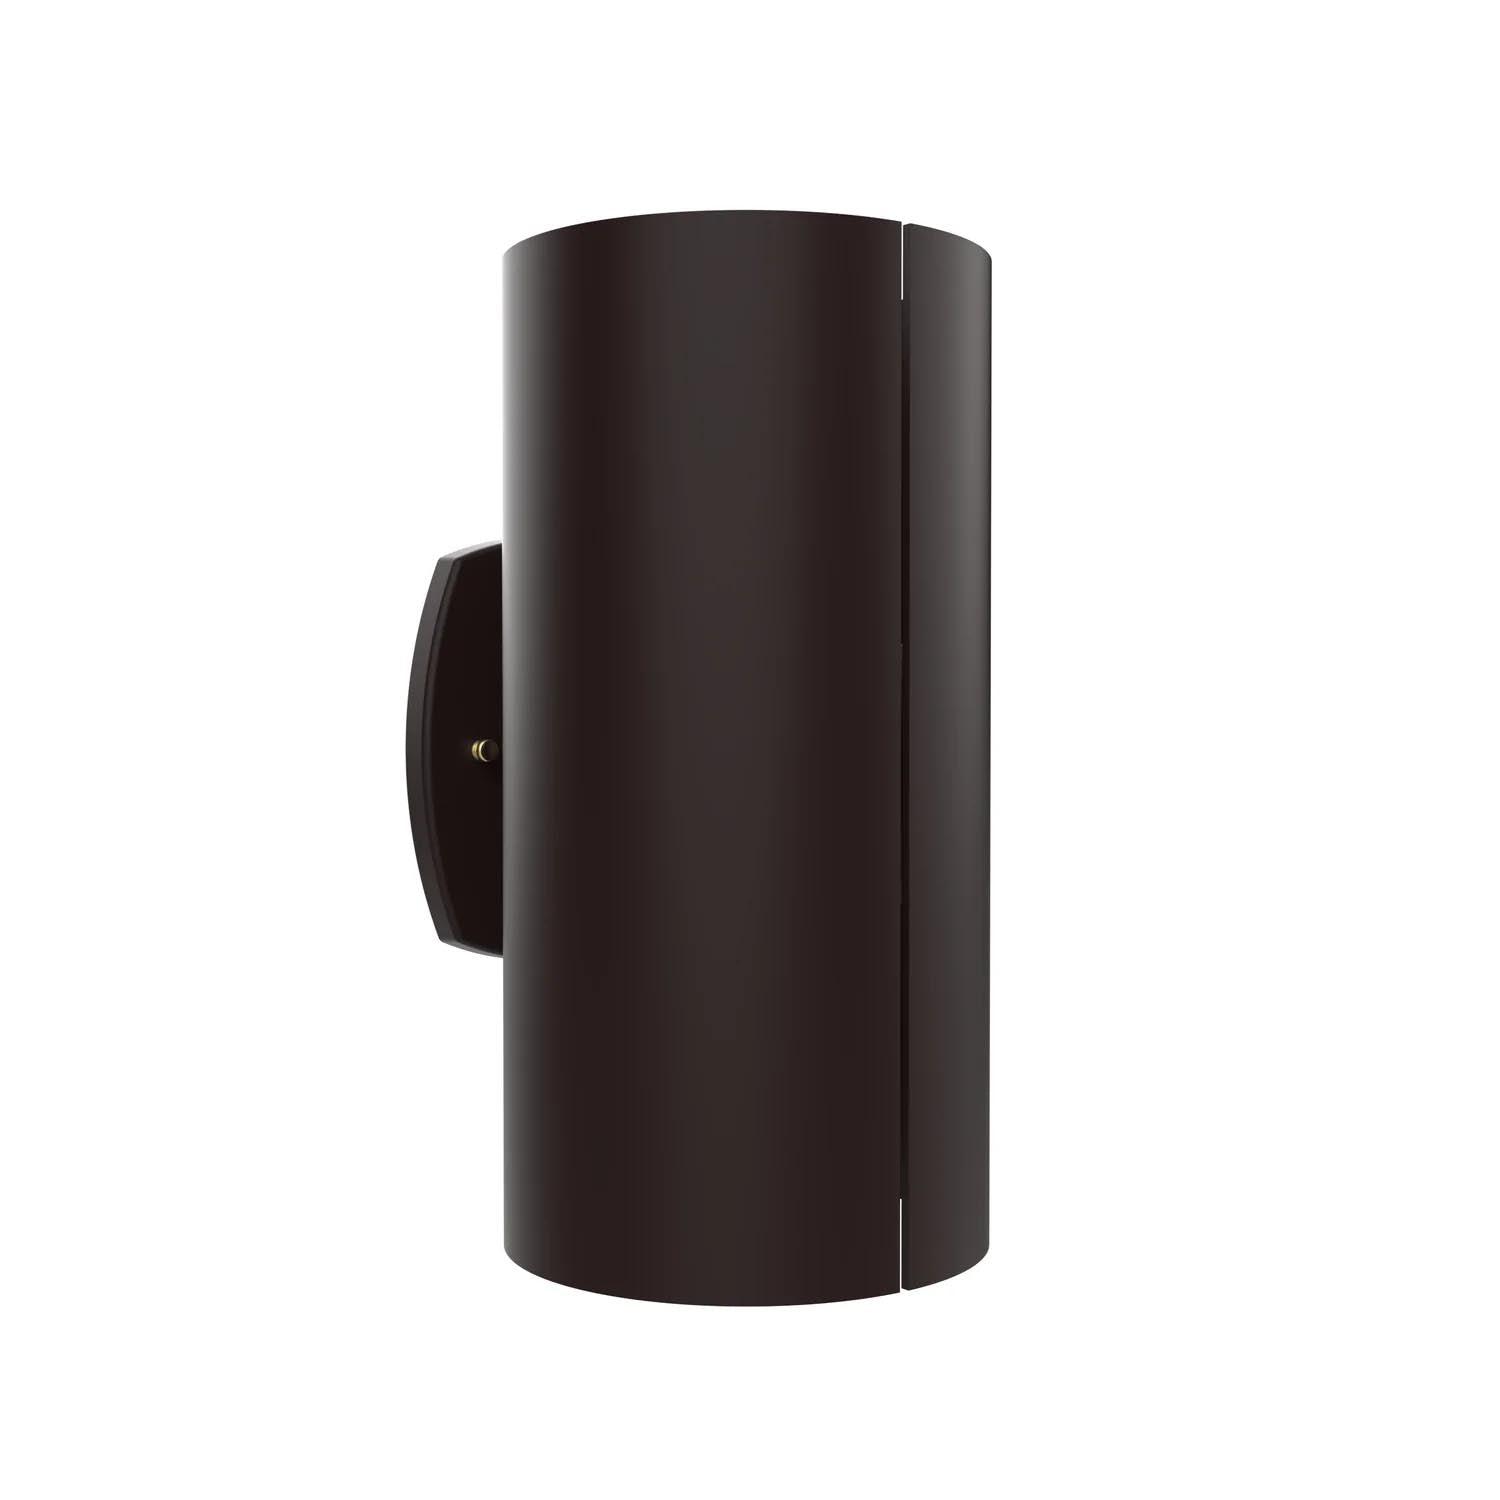 EVOLUTION Outdoor wall lighting  Brown INTEGRATED LED - 1842-09-LD14C | SNOC